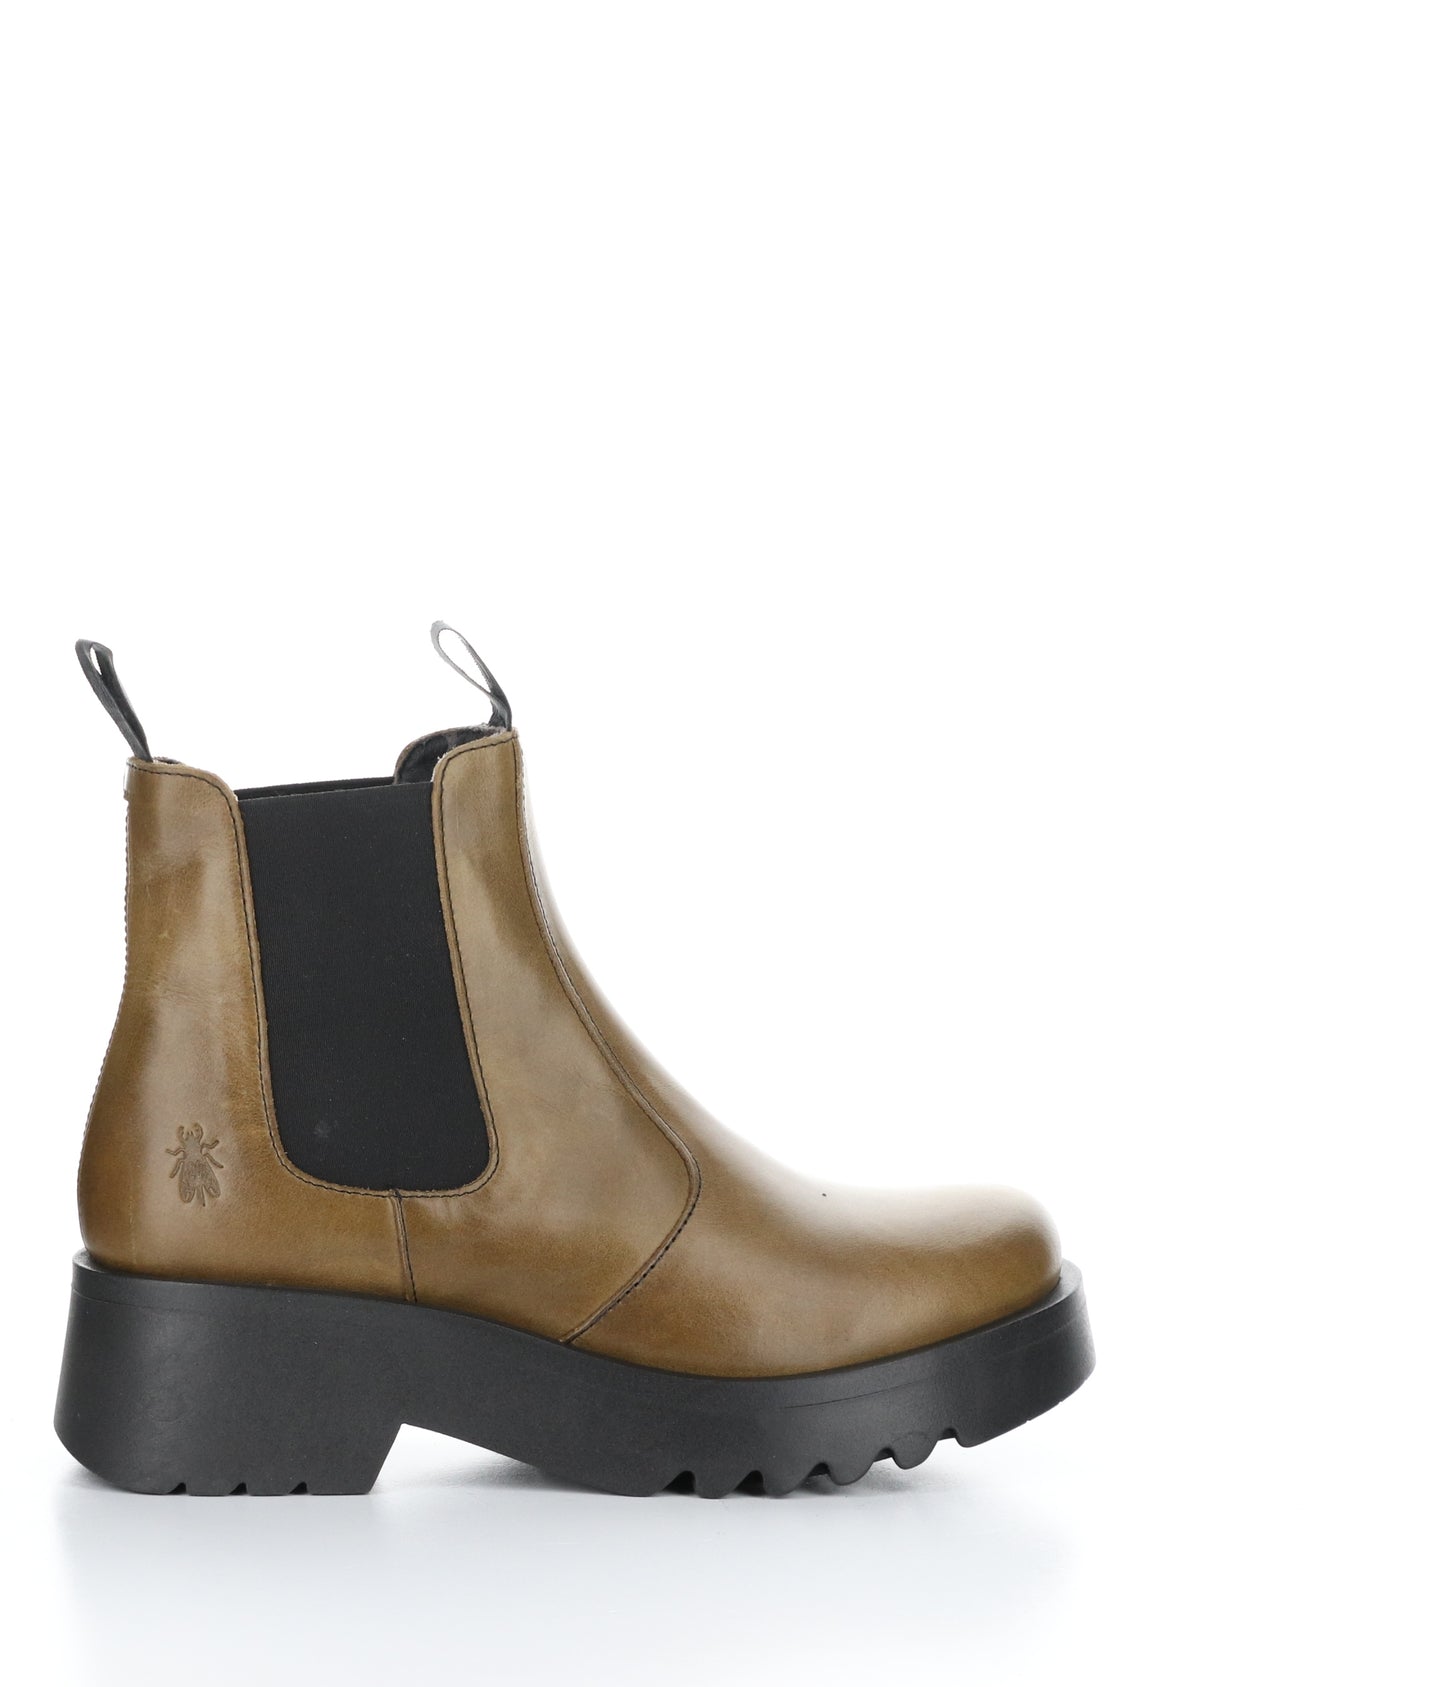 Right profile view of a brown Chelsea boot with black elastic side panel and a black, rubber lug sole.